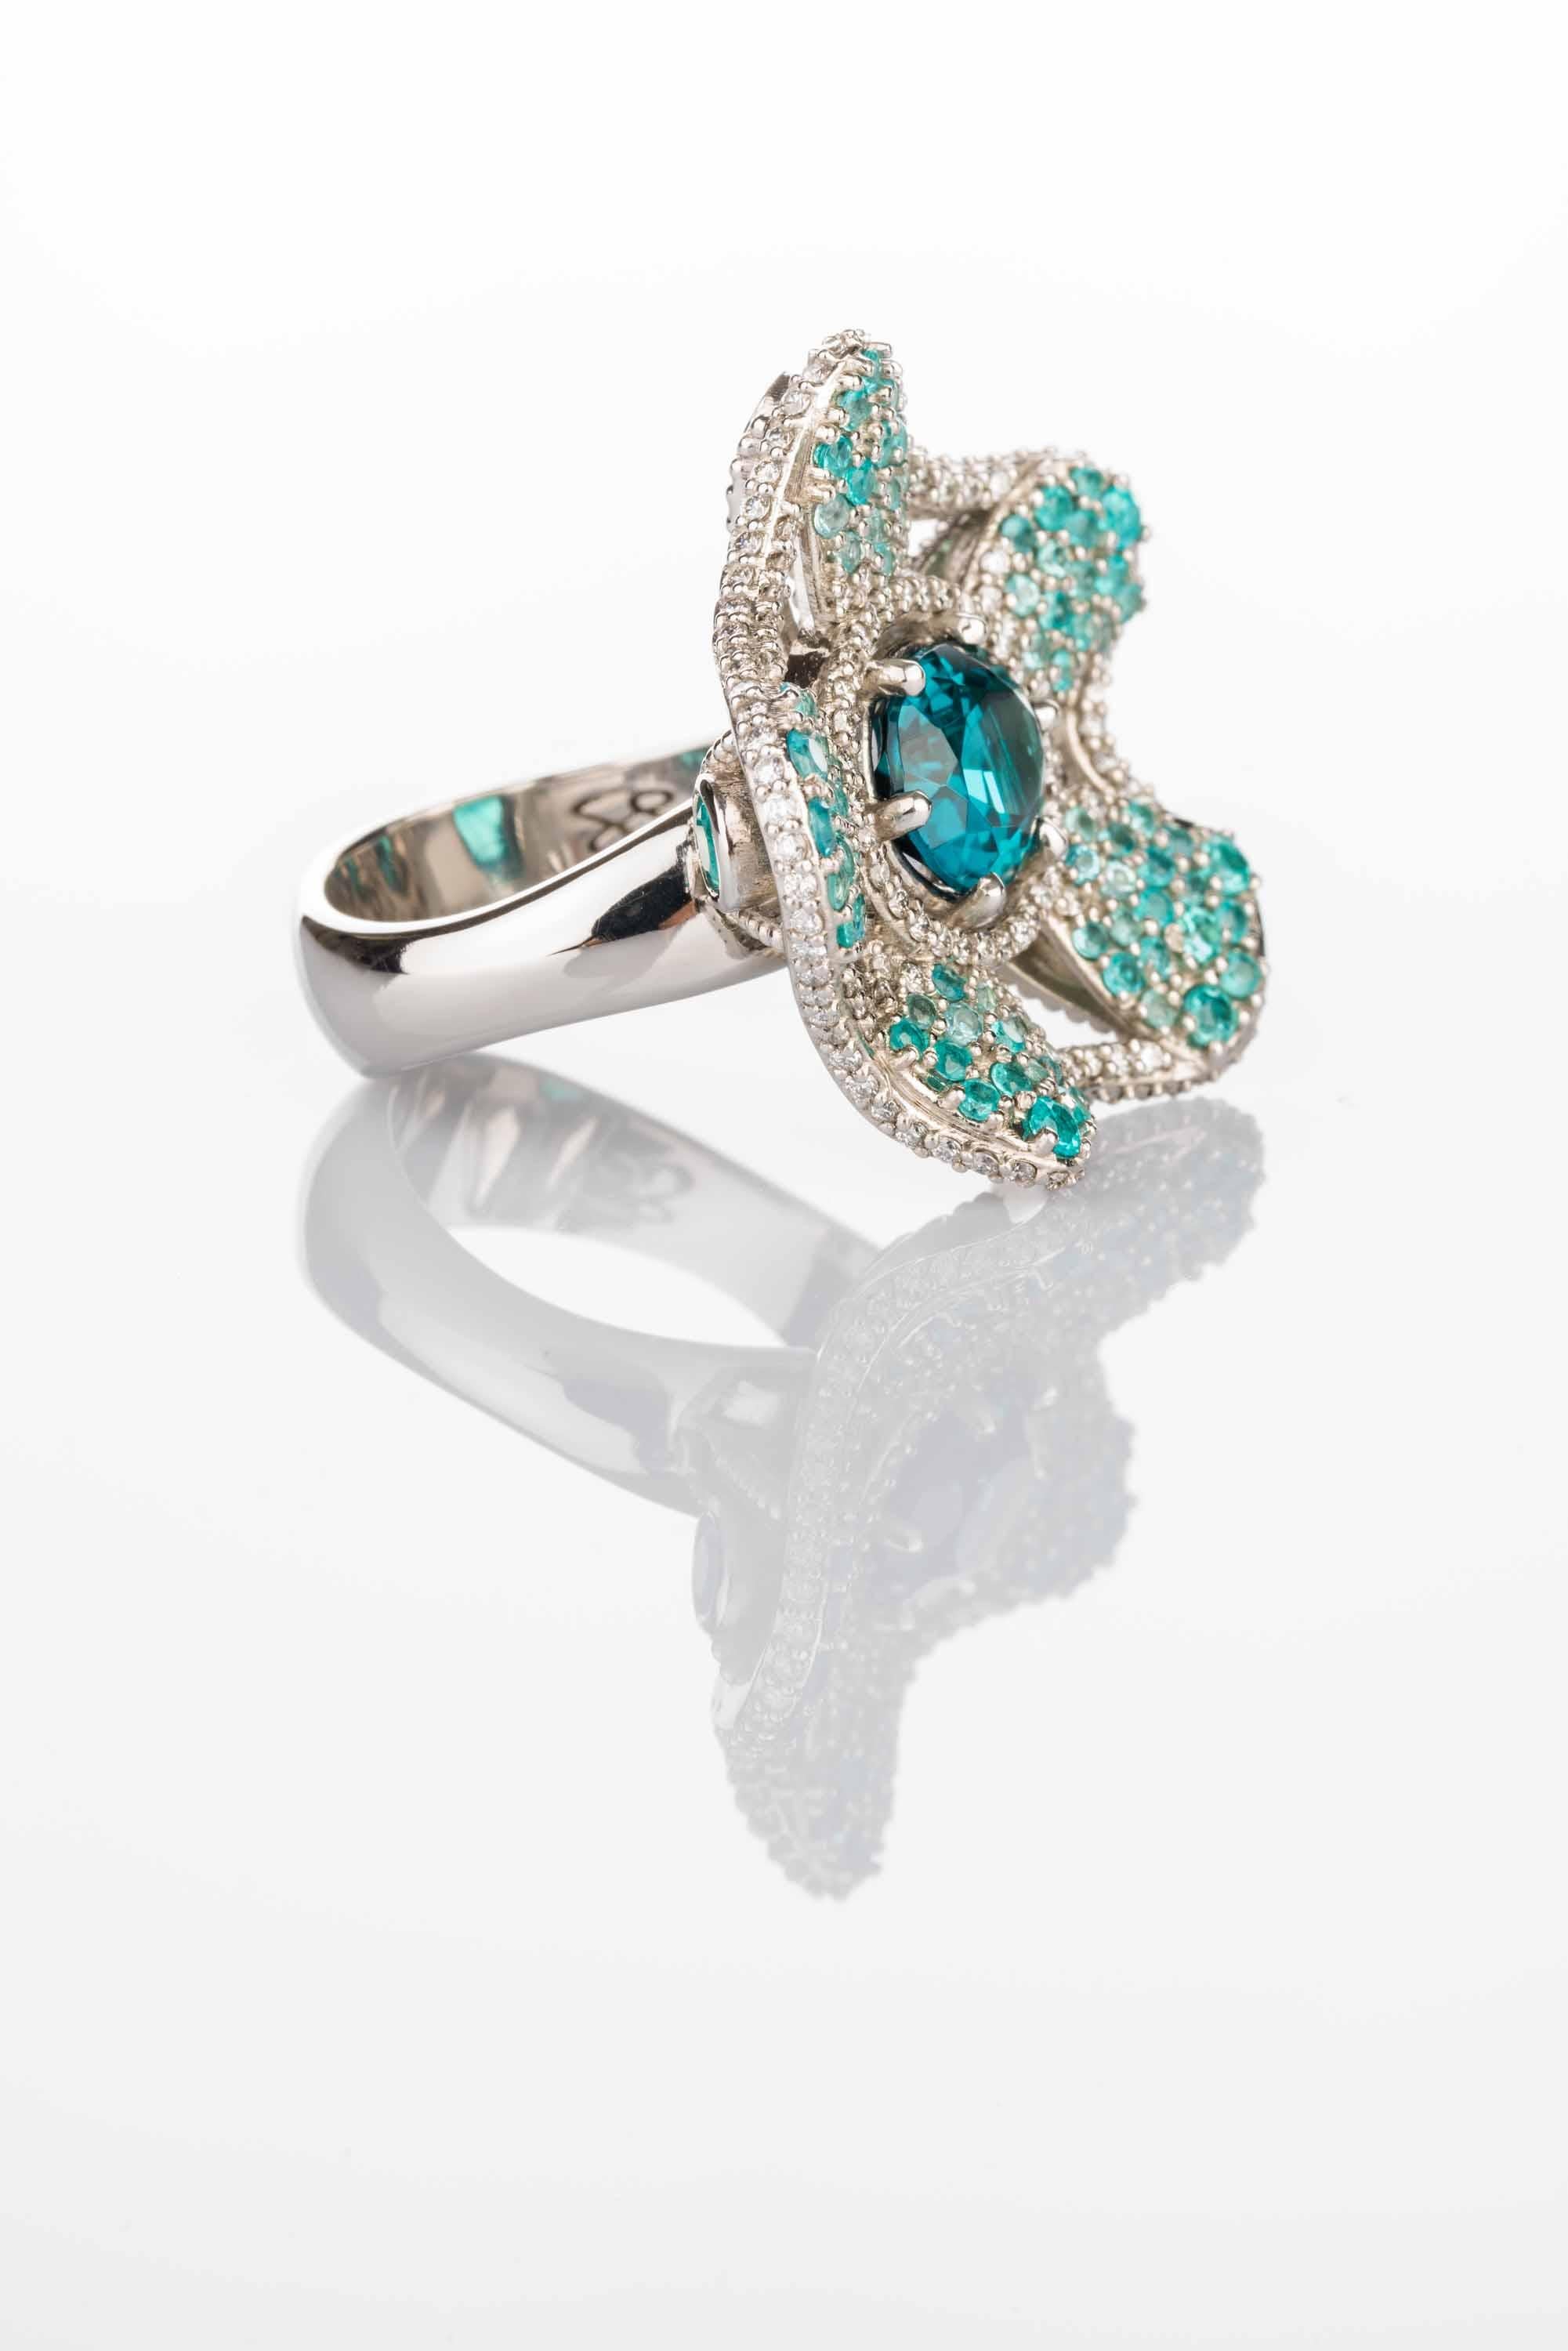 A platinum ring set with a faceted oval indicolite tourmaline 2.49 carats, 0.78 total carat weight round full cut white diamonds F color VS clarity, 0.86 total carat weight round full cut intense blue Brazilian Paraiba tourmaline, 0.71 total carat